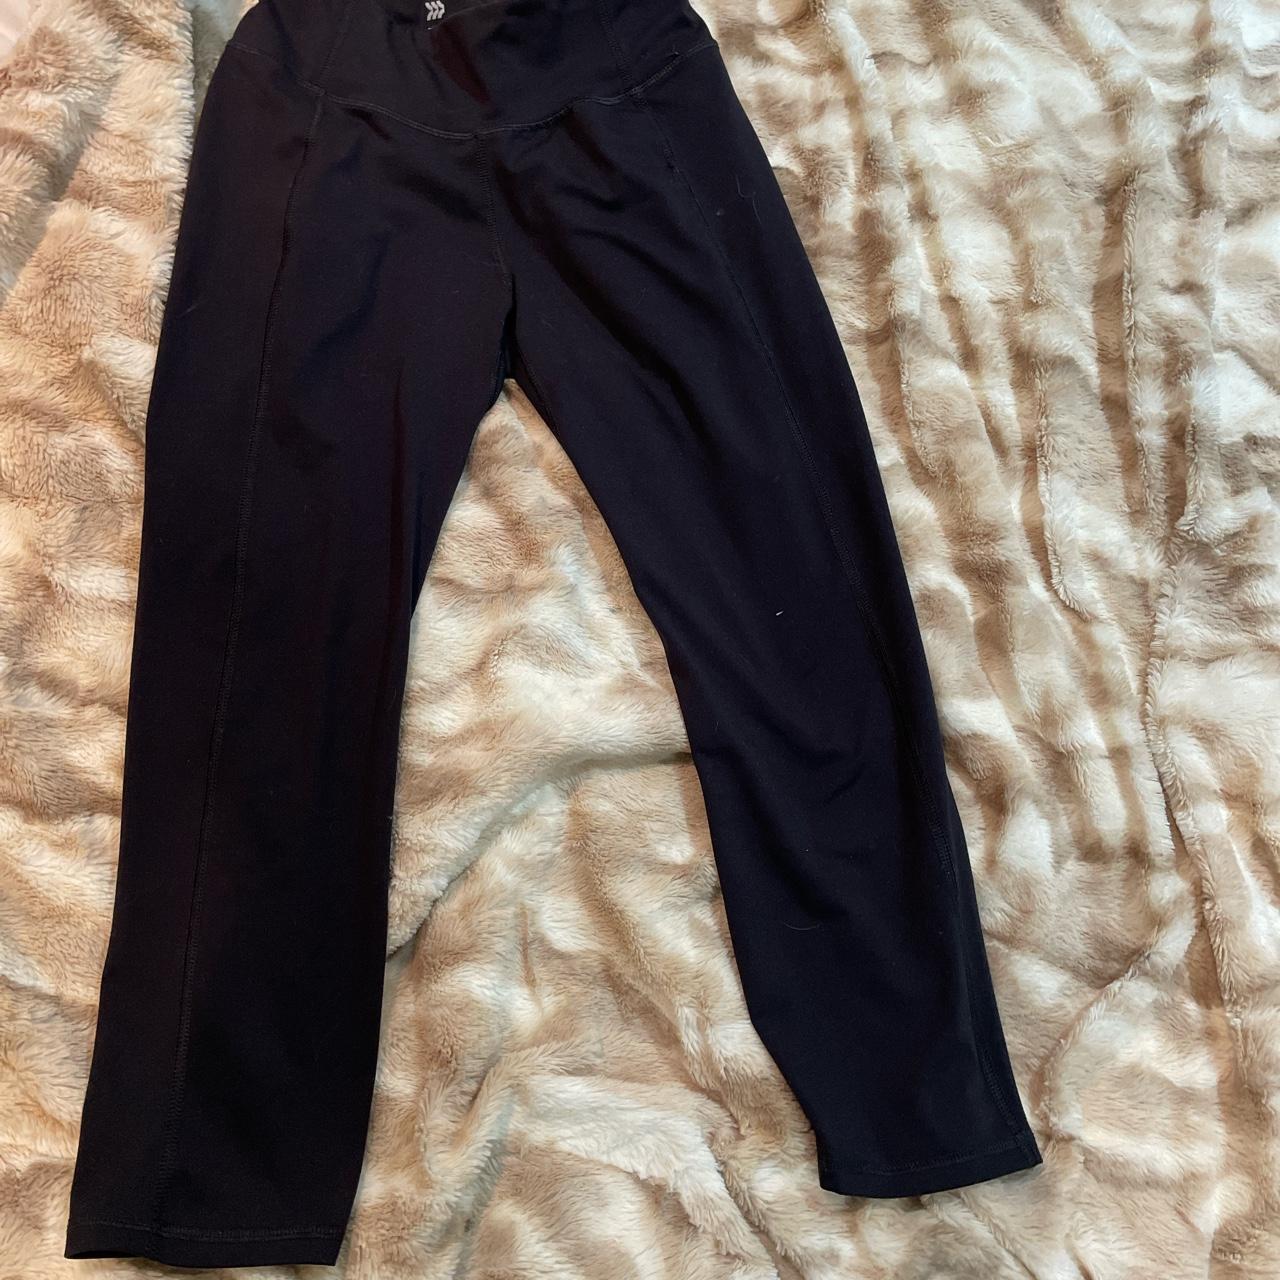 all in motion leggings - wayyy too small on me and i - Depop